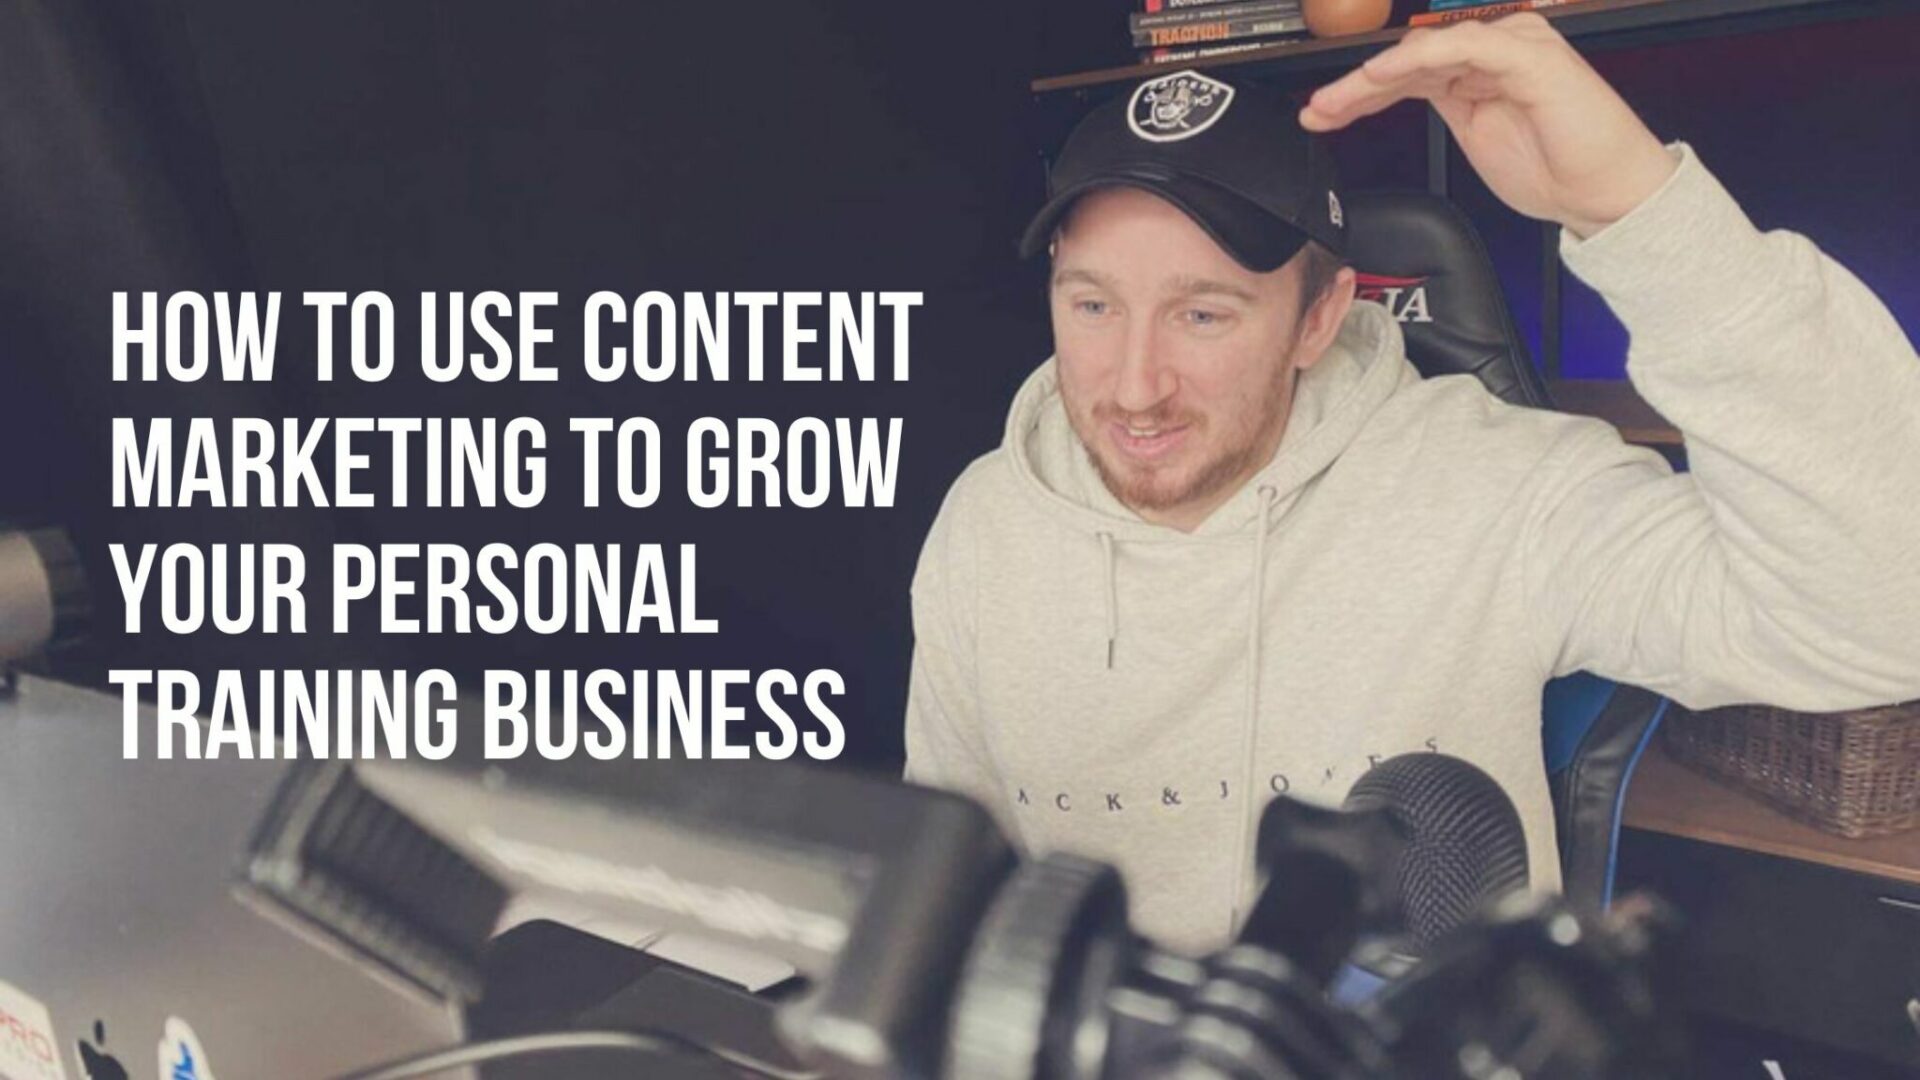 How to use content marketing to grow your personal training business